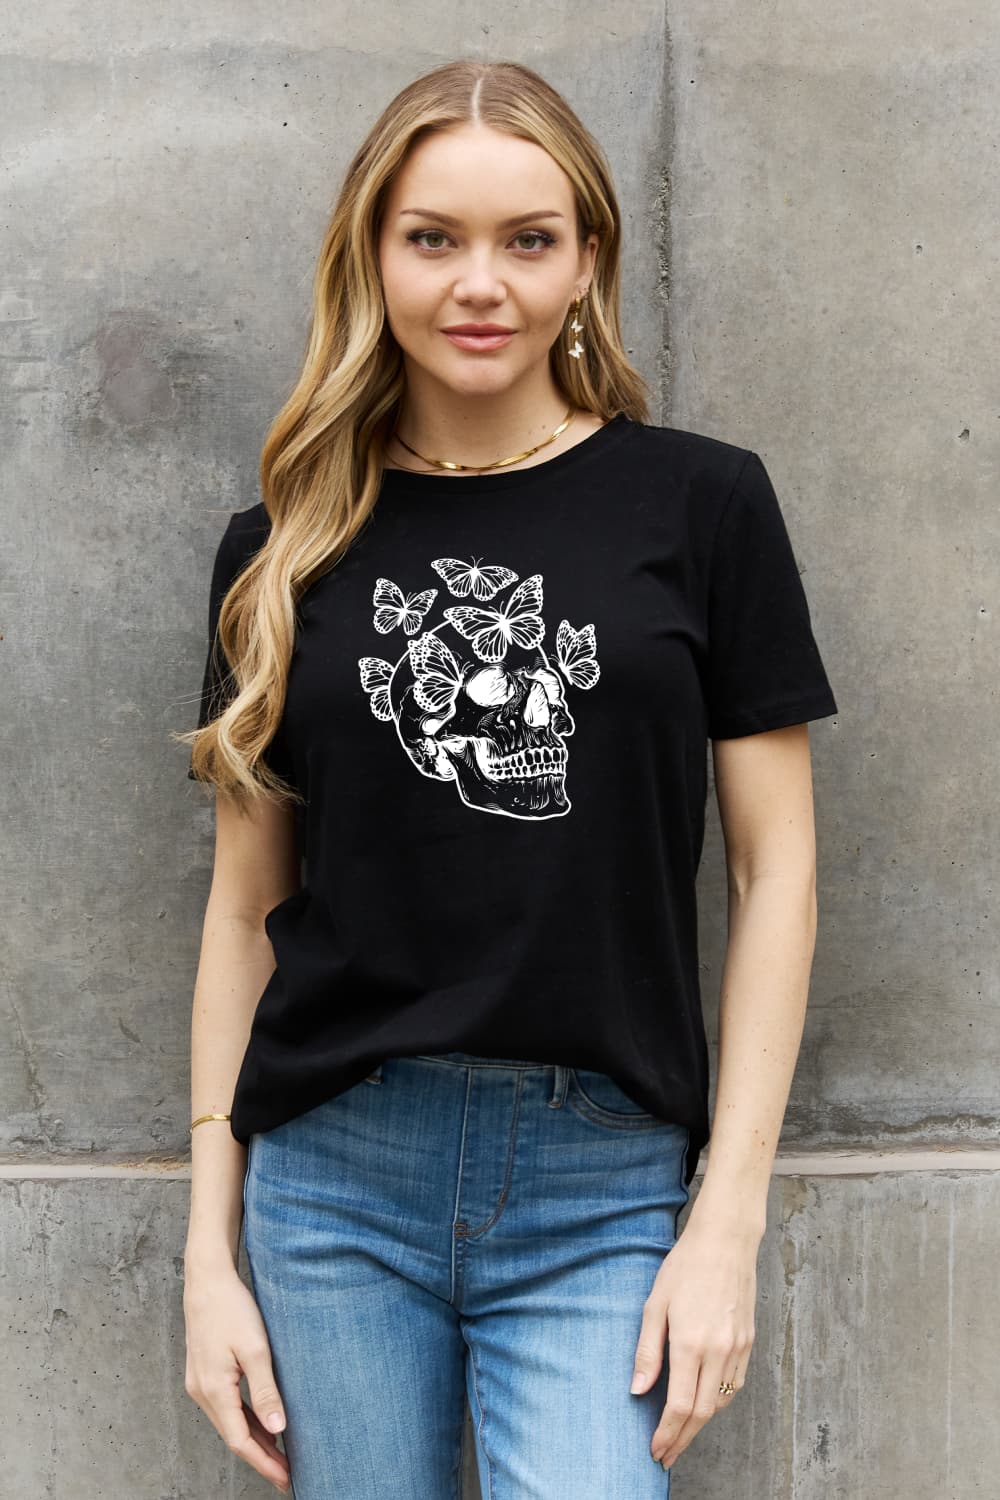 Simply Love Full Size Butterfly Skull Graphic Cotton Tee